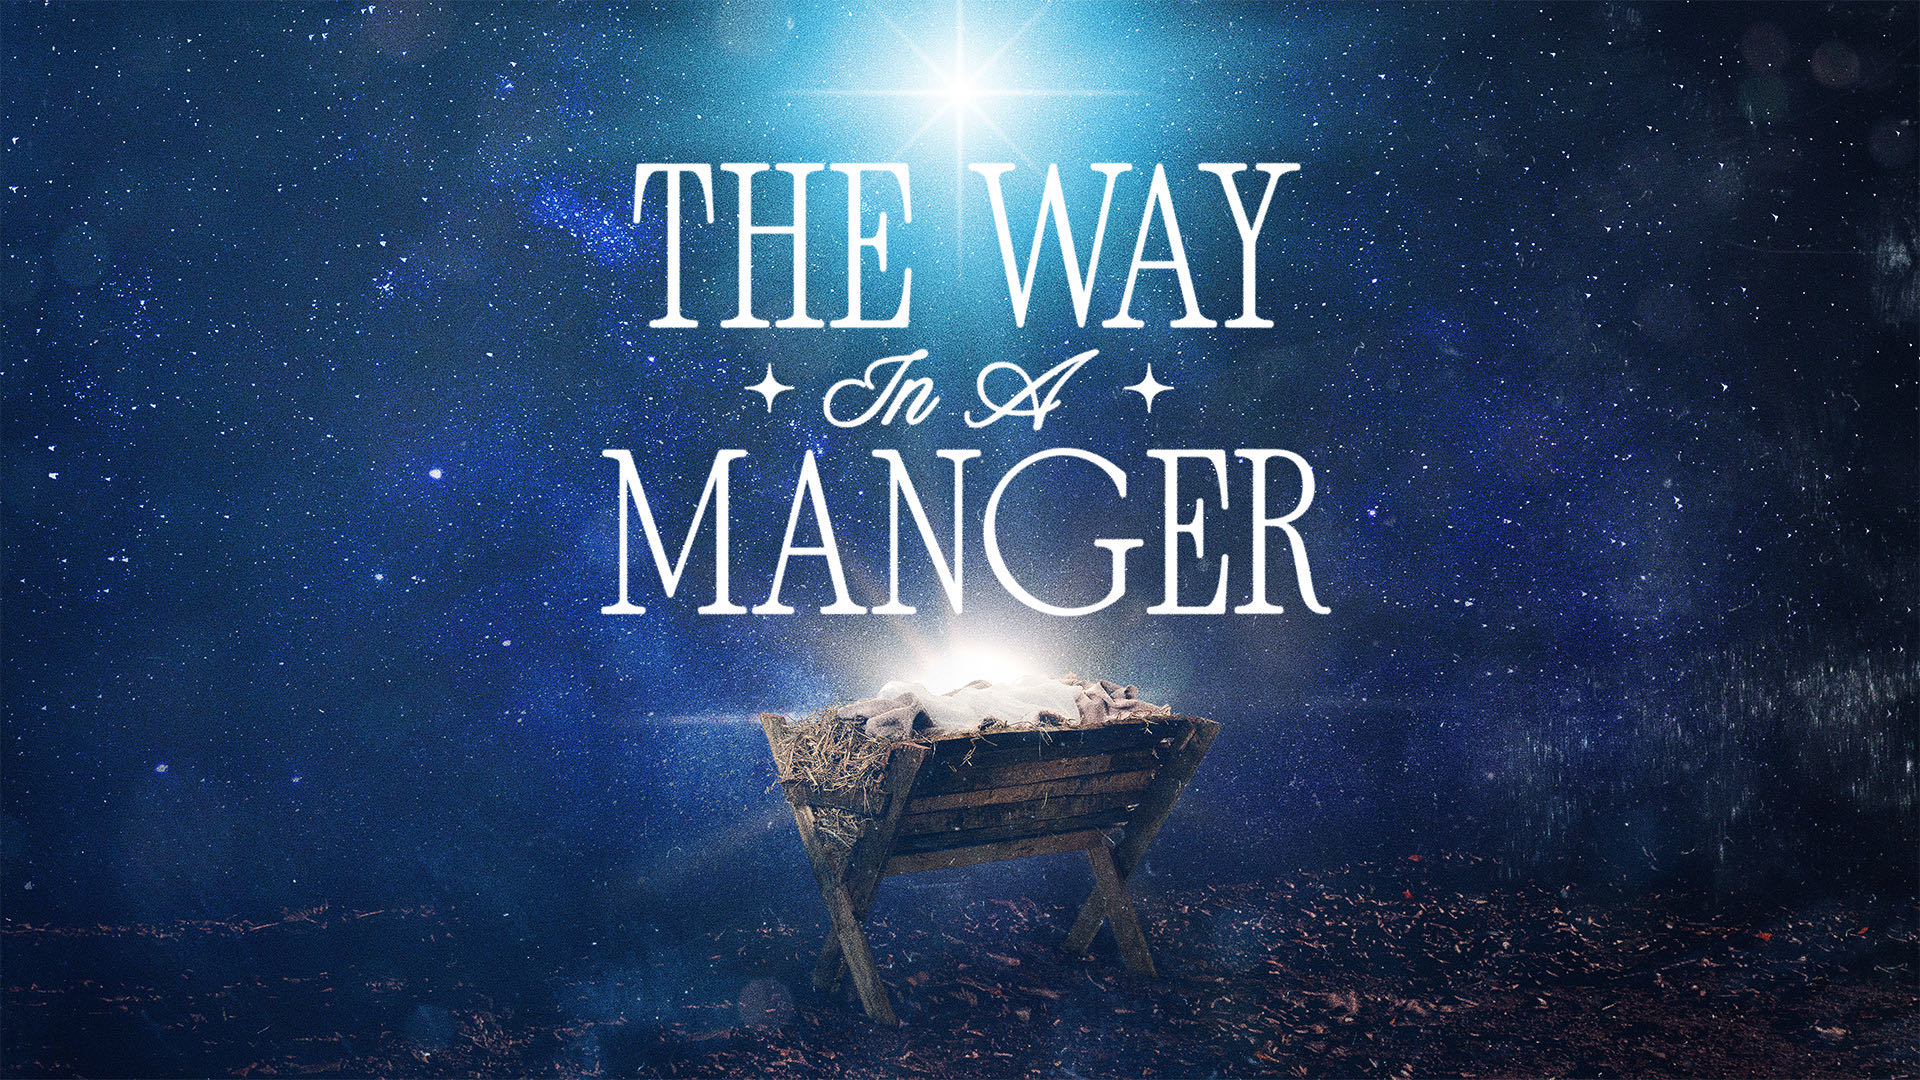 The Way In A Manger